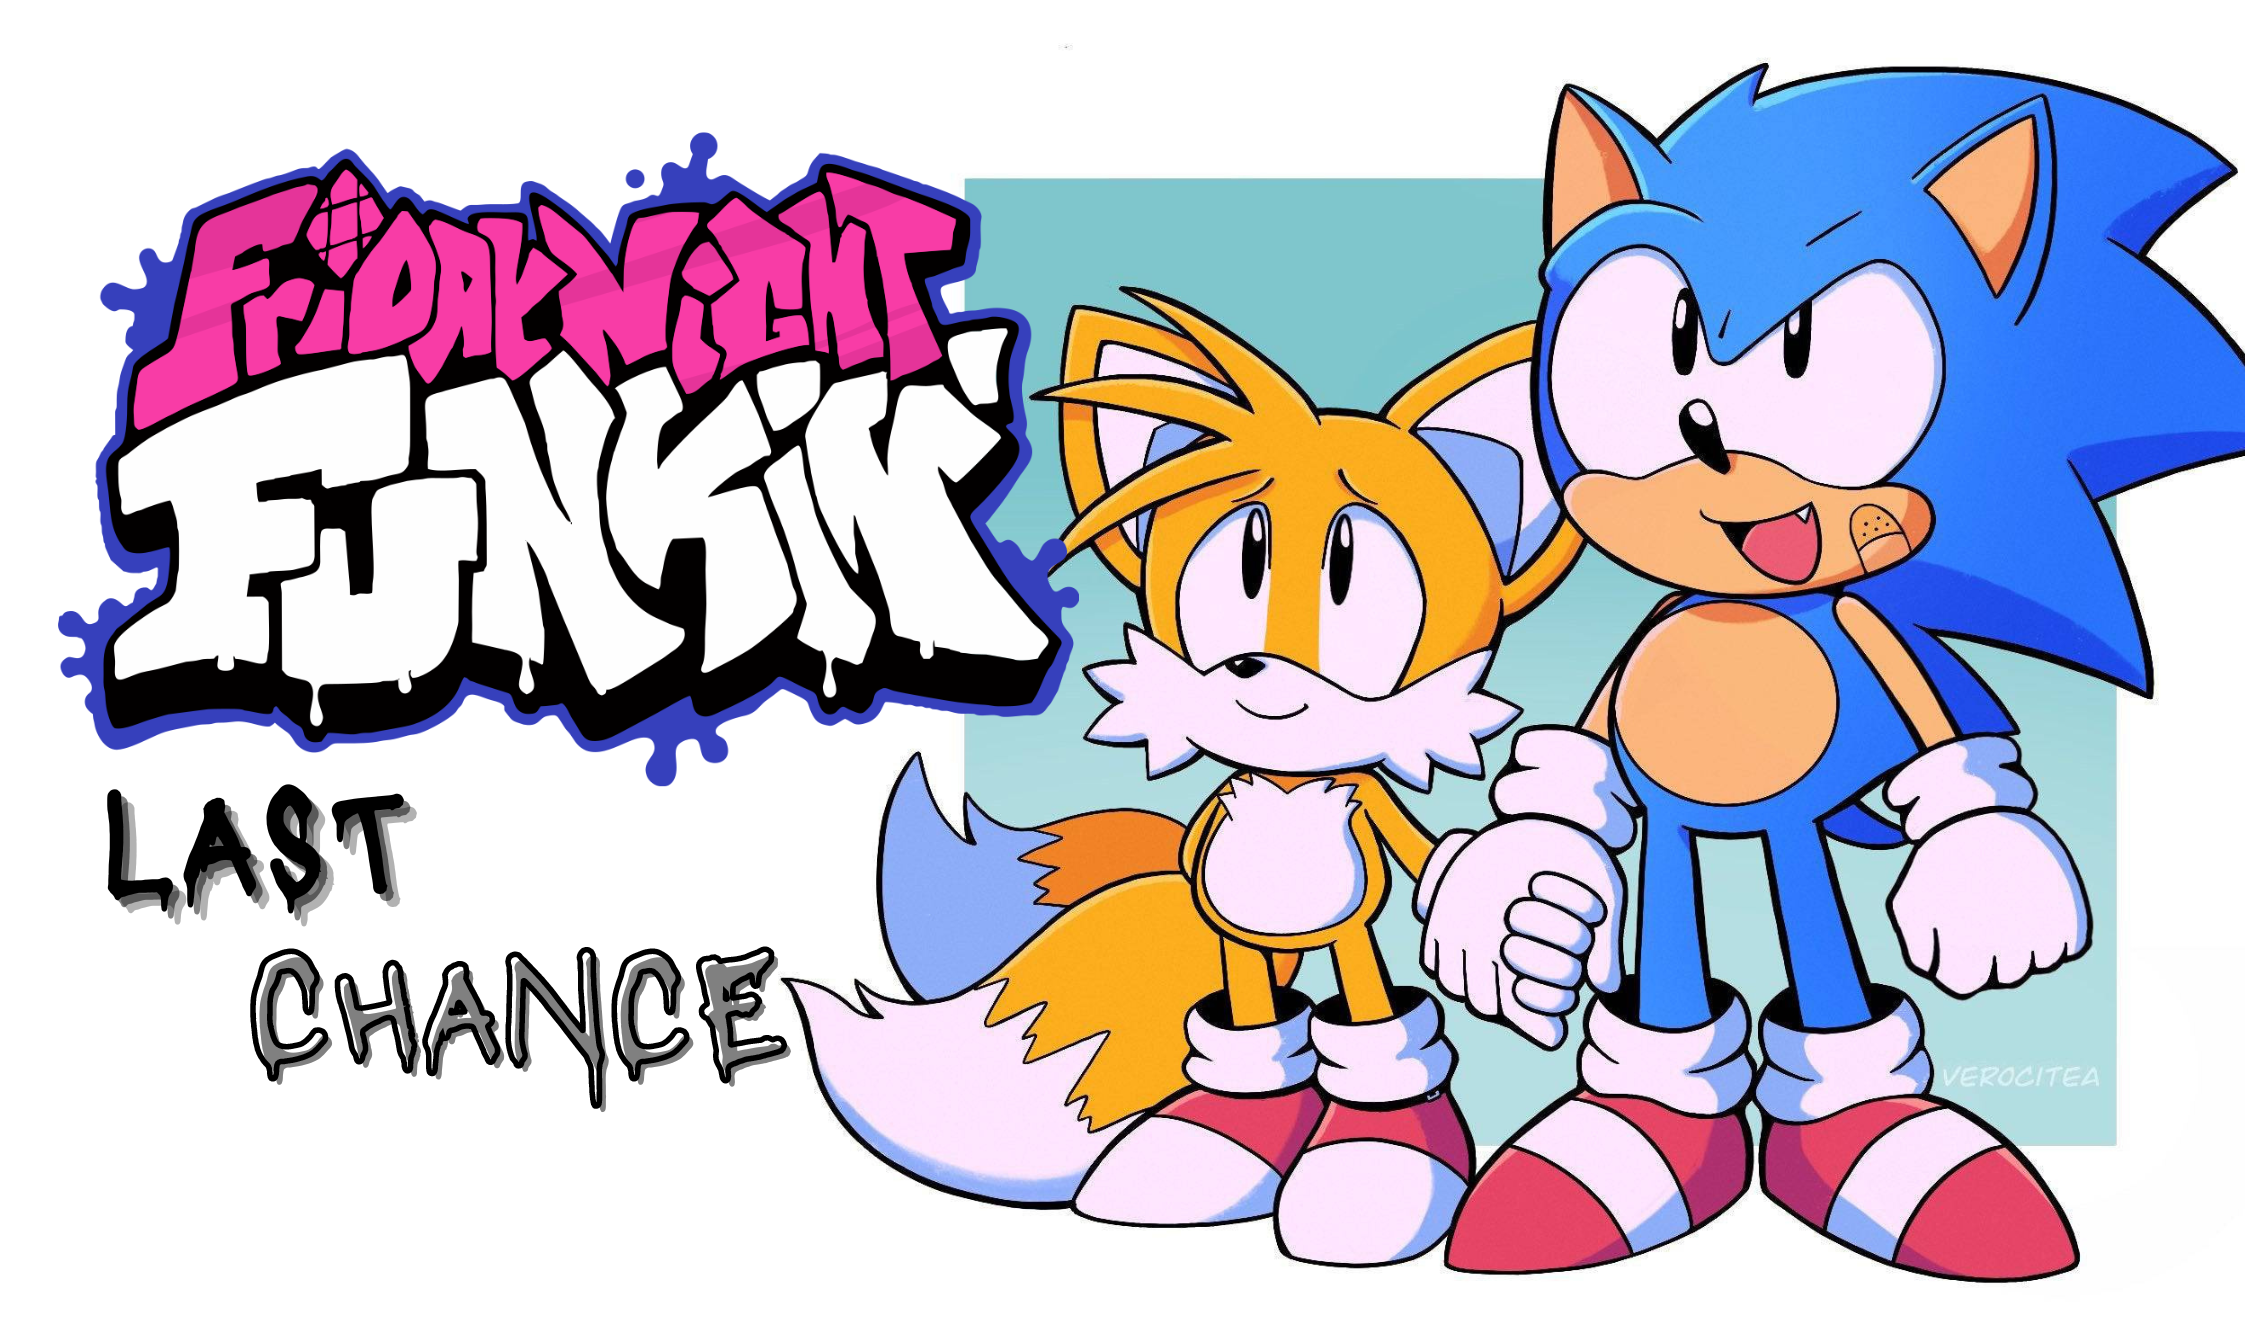 FRIDAY NIGHT FUNKIN' VS SONIC MANIA free online game on